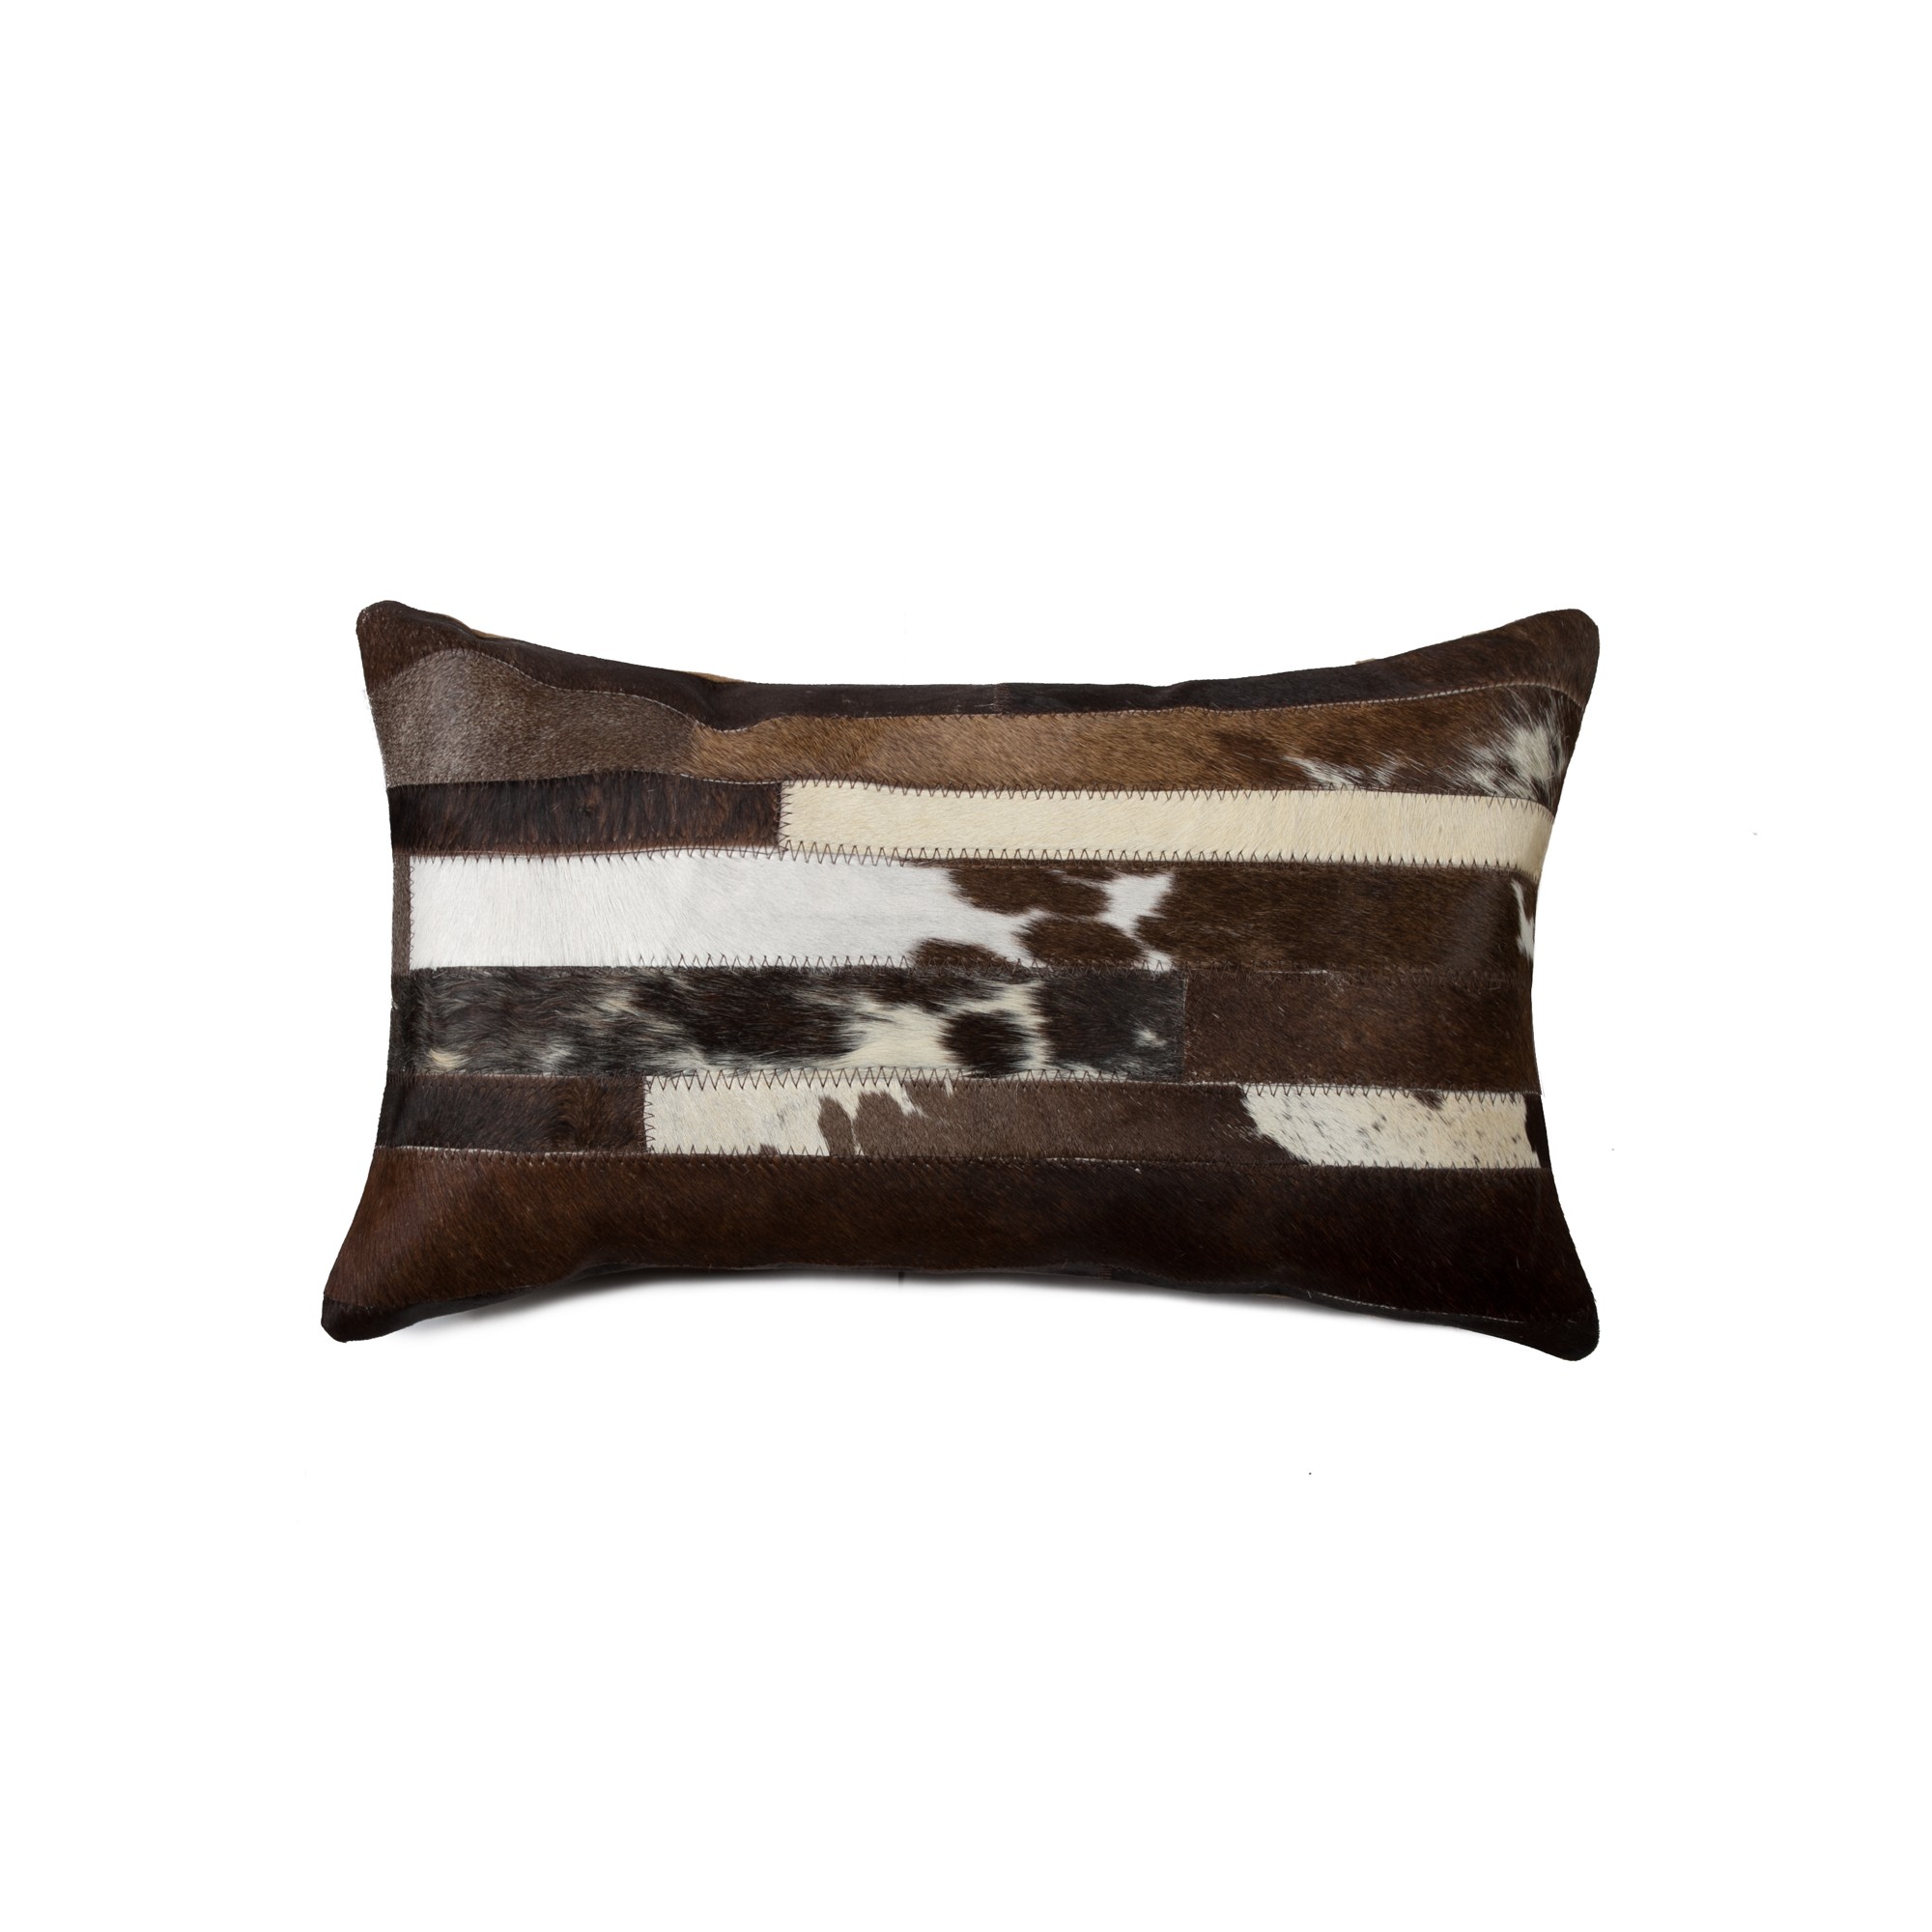 12" x 20" x 5" Chocolate And White - Pillow